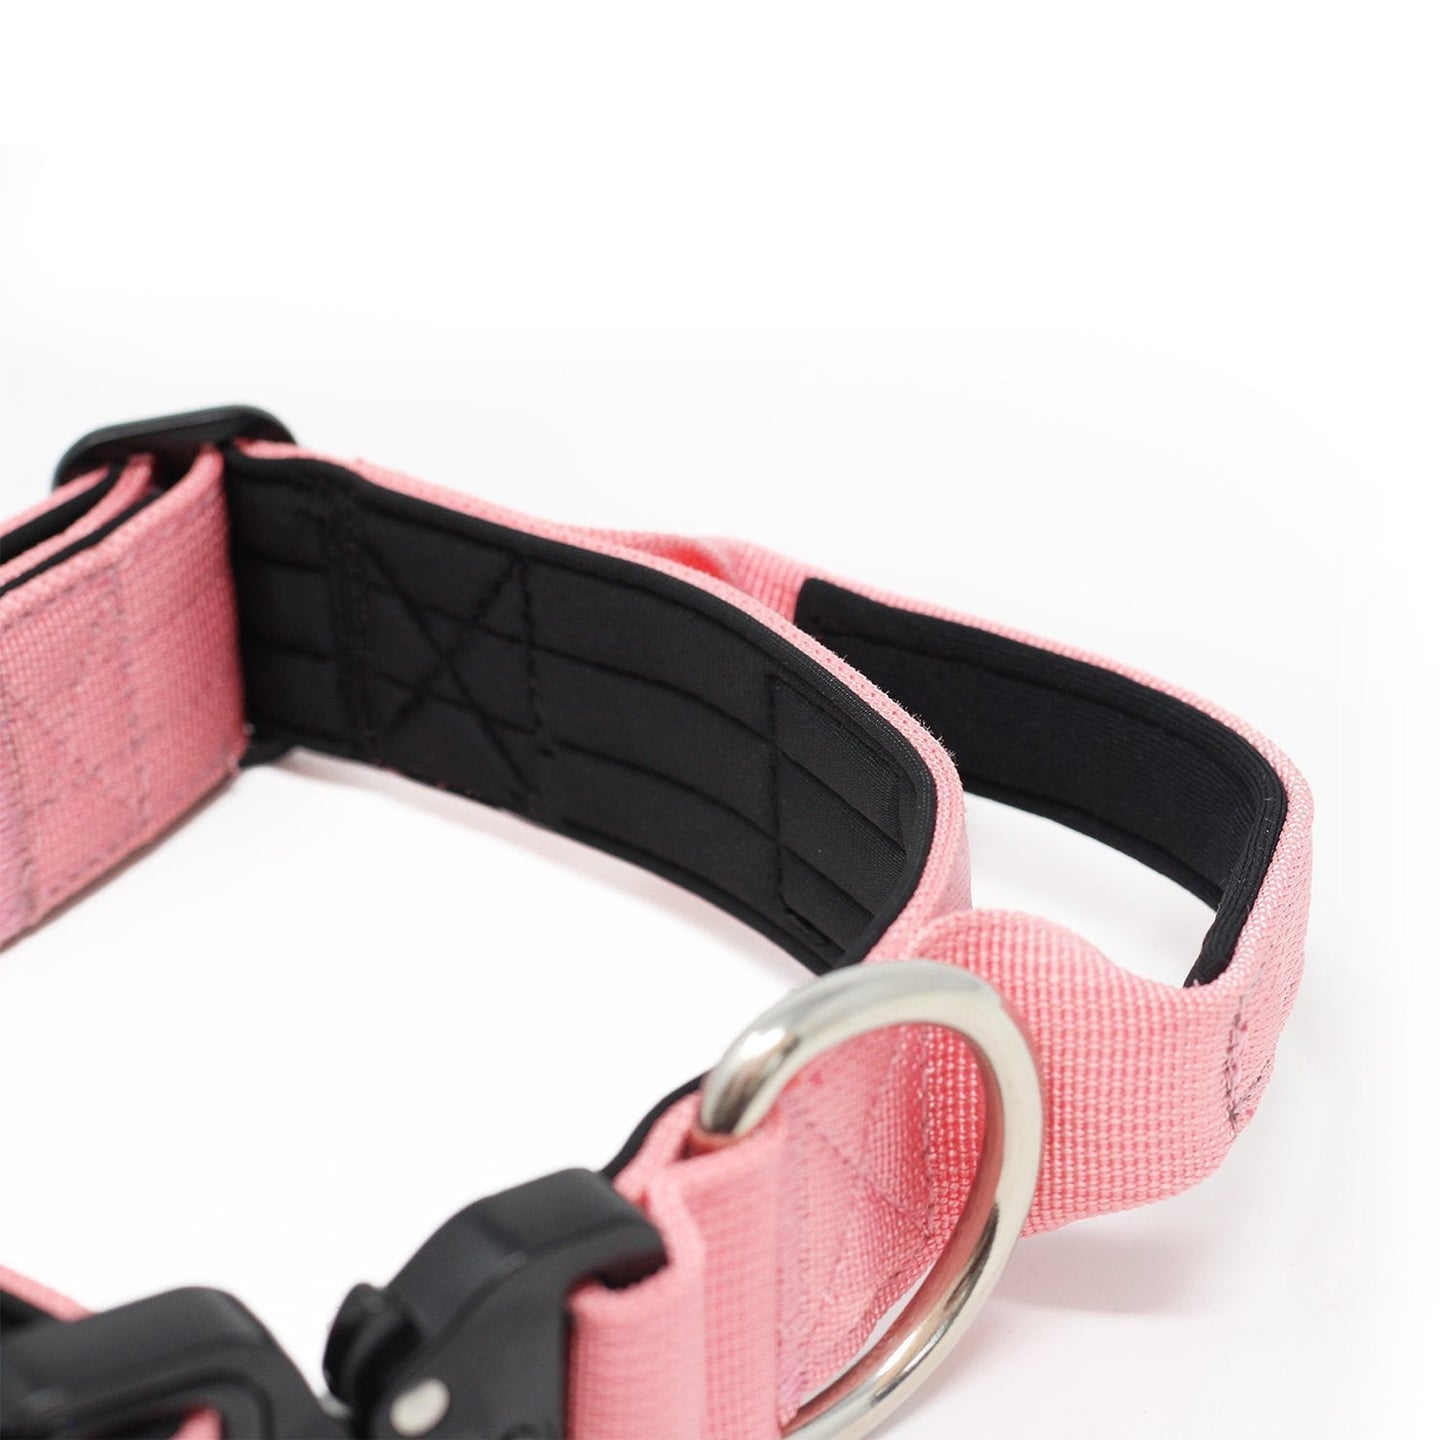 Bully Billows 1.5" (4CM) Combat Collar with handle - Pink (Padded) - Bulletproof Pet Products Inc